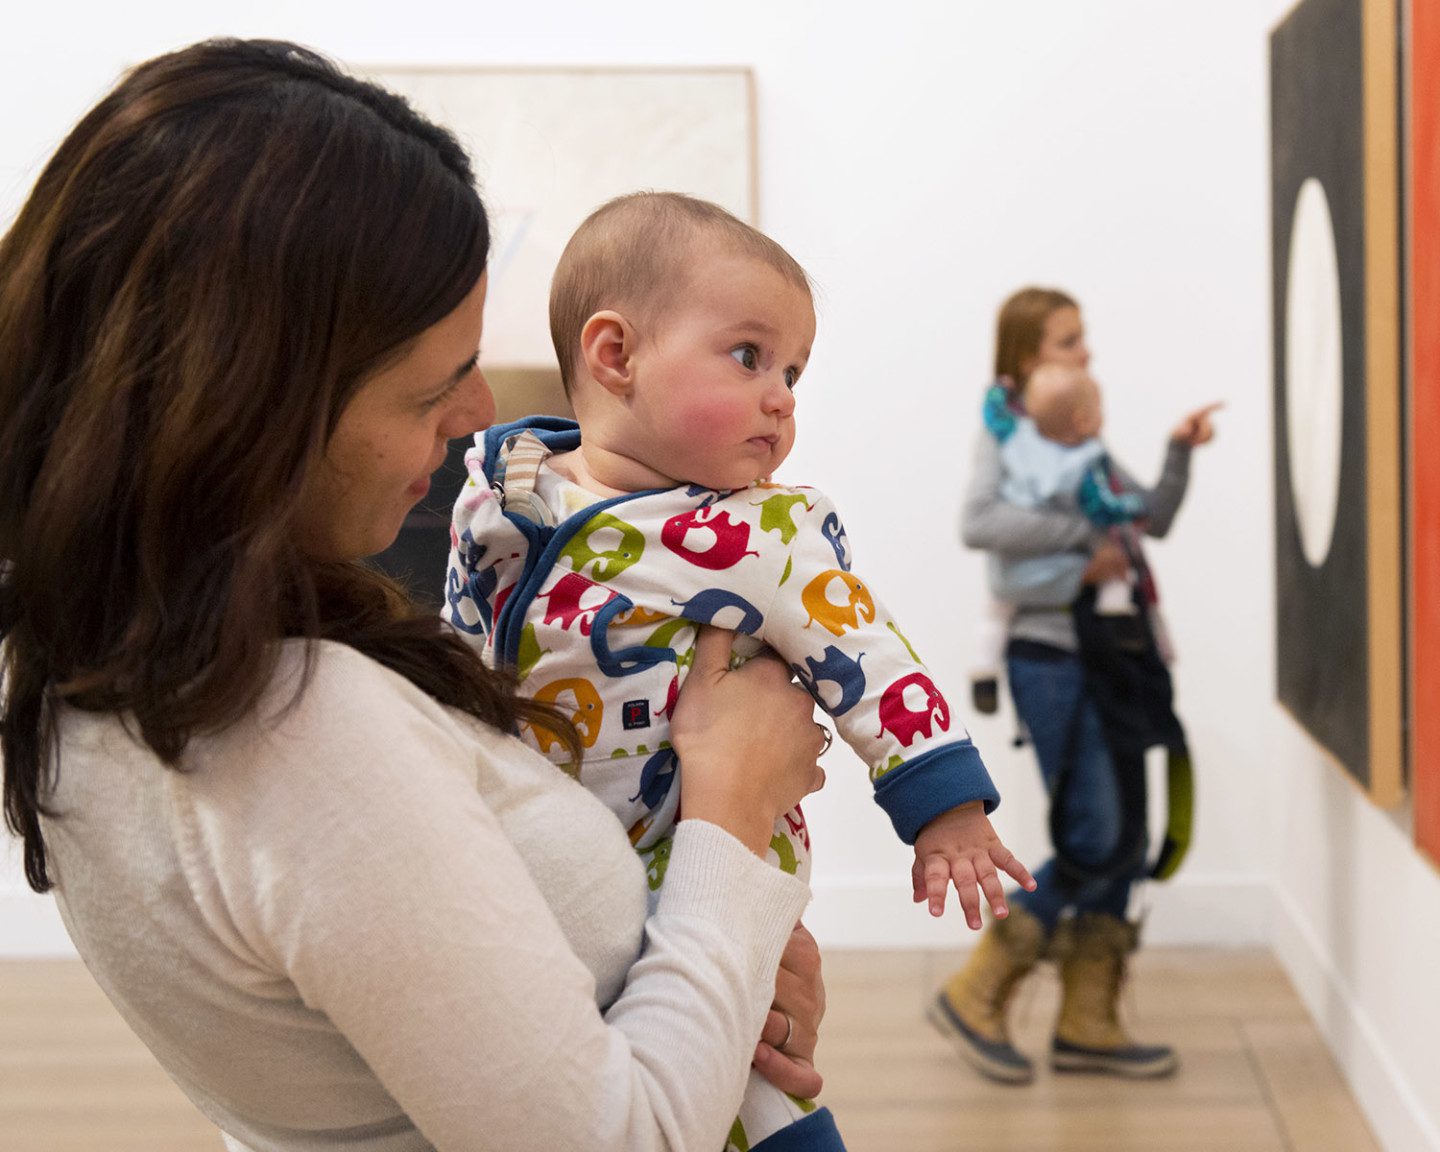 A baby dressed in pyjamas looks at a painting